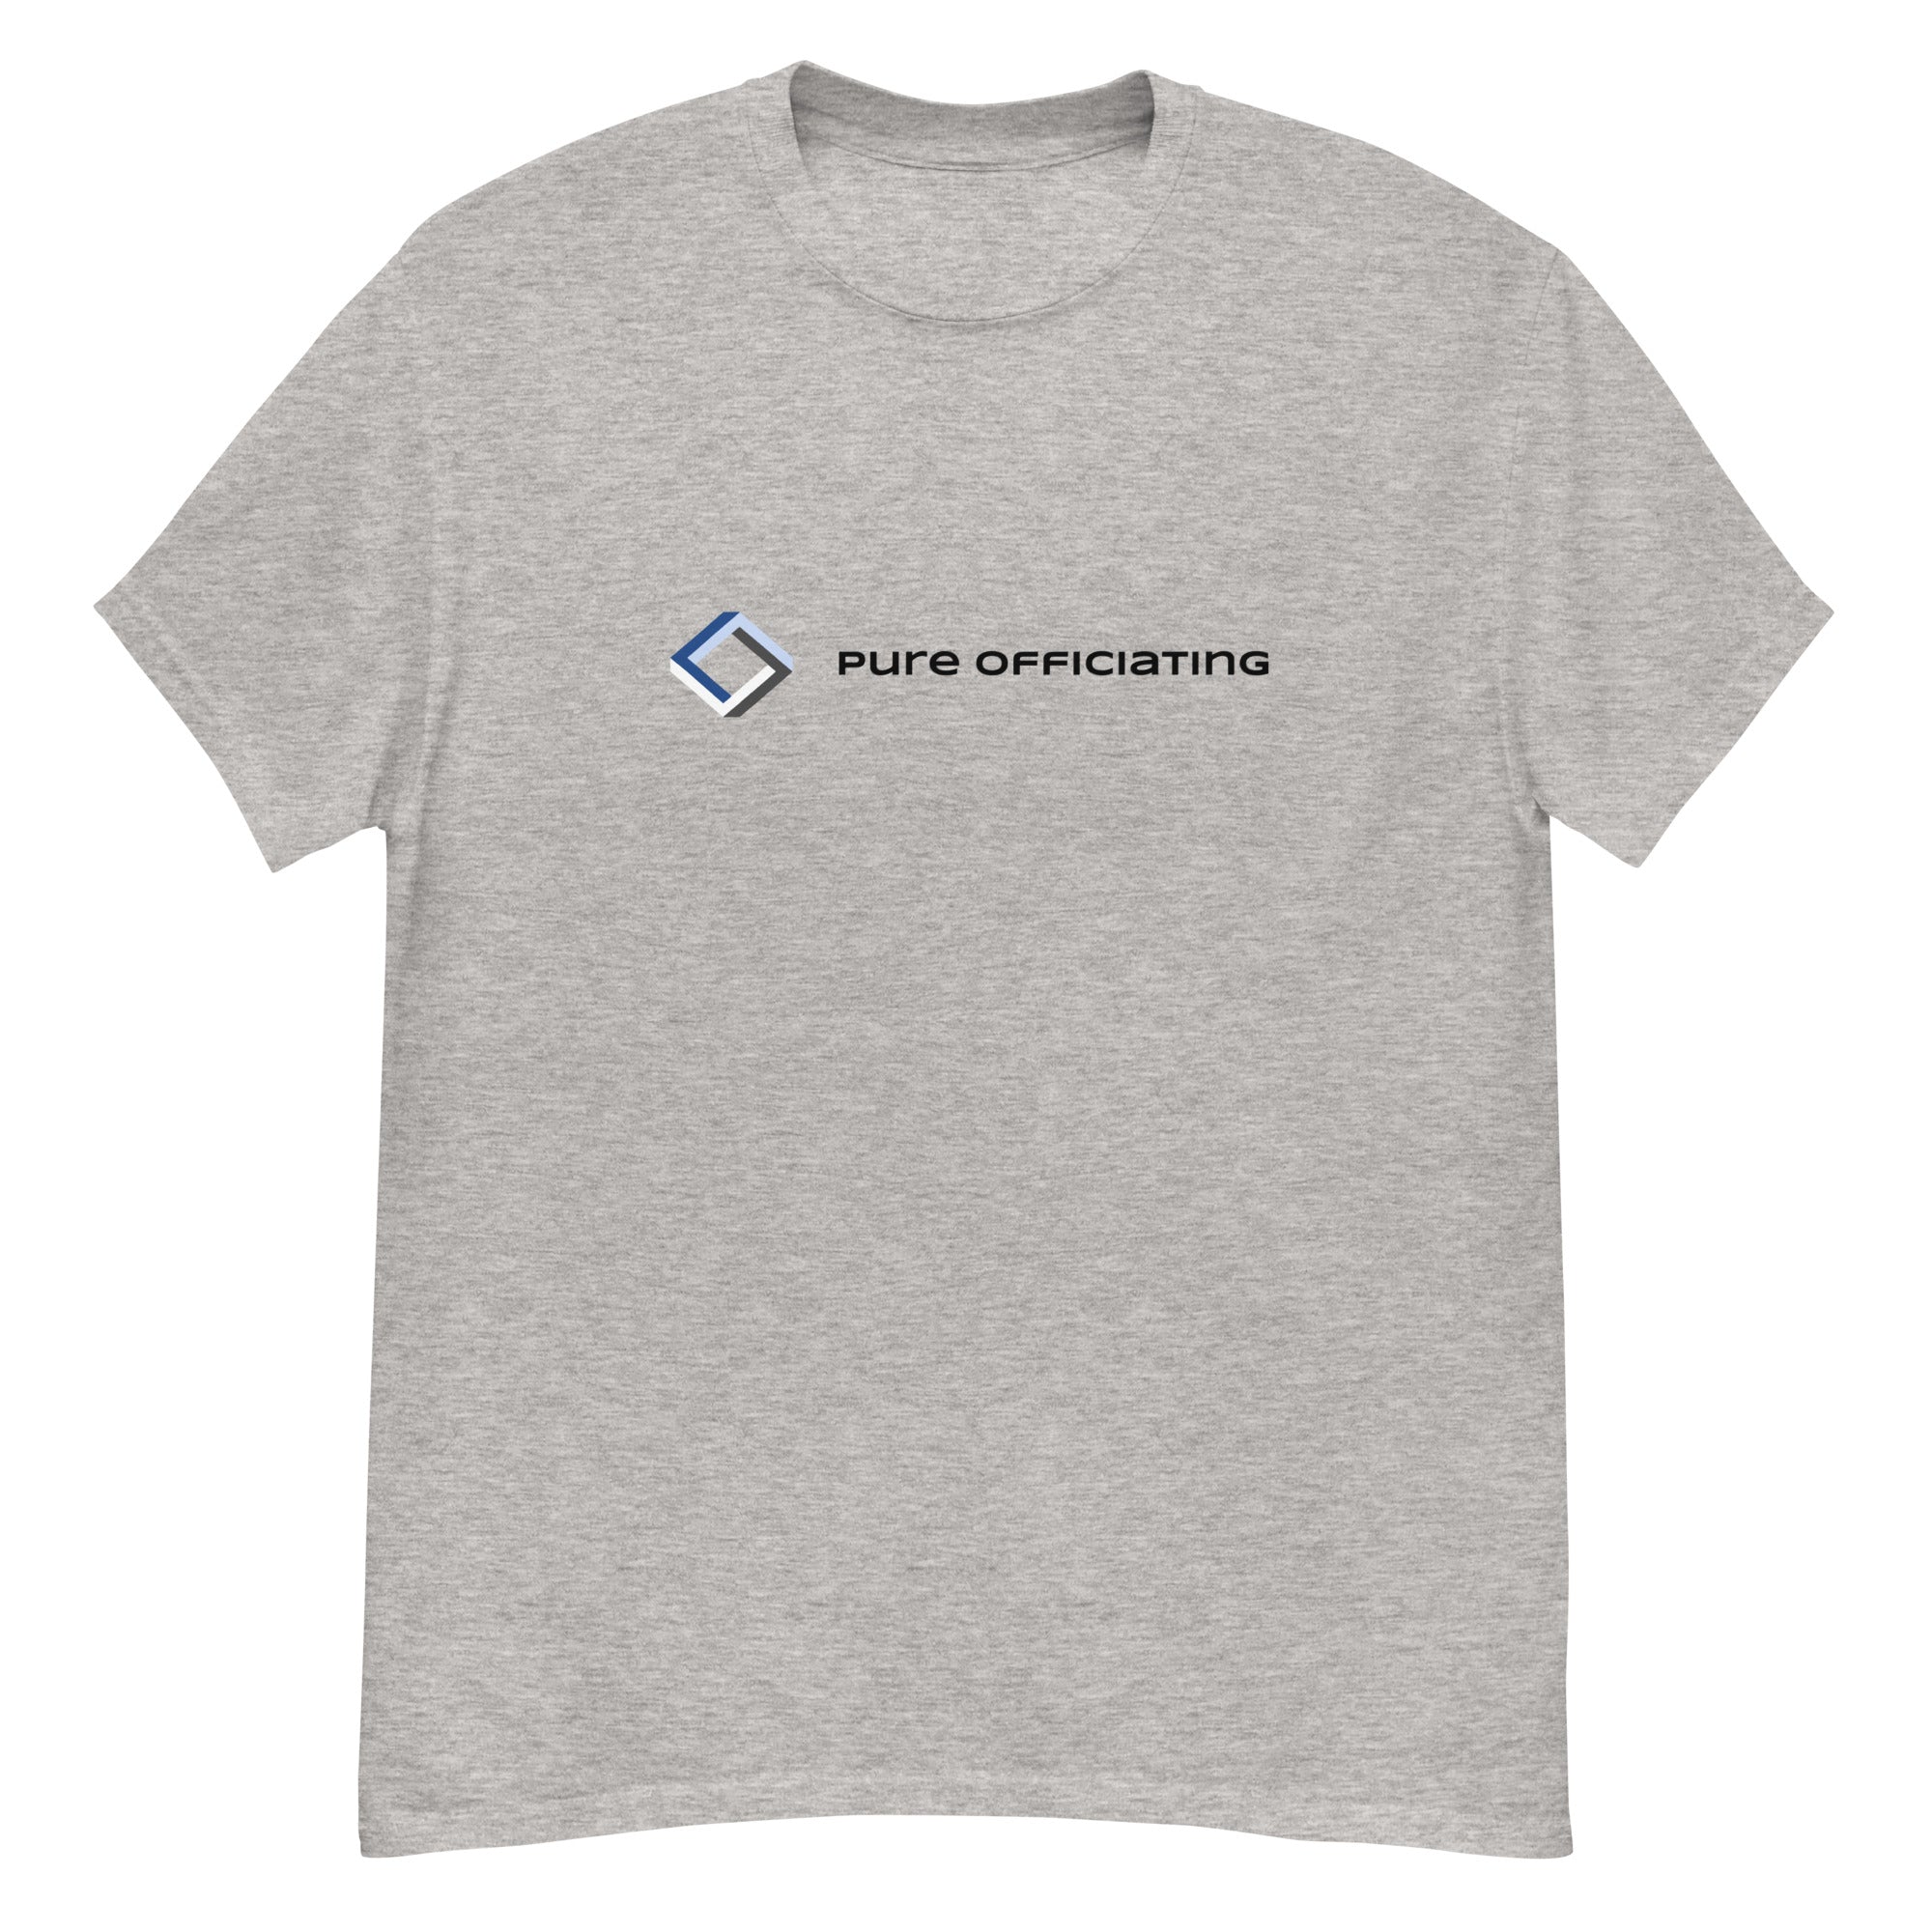 PURE OFFICIATING Men's classic tee